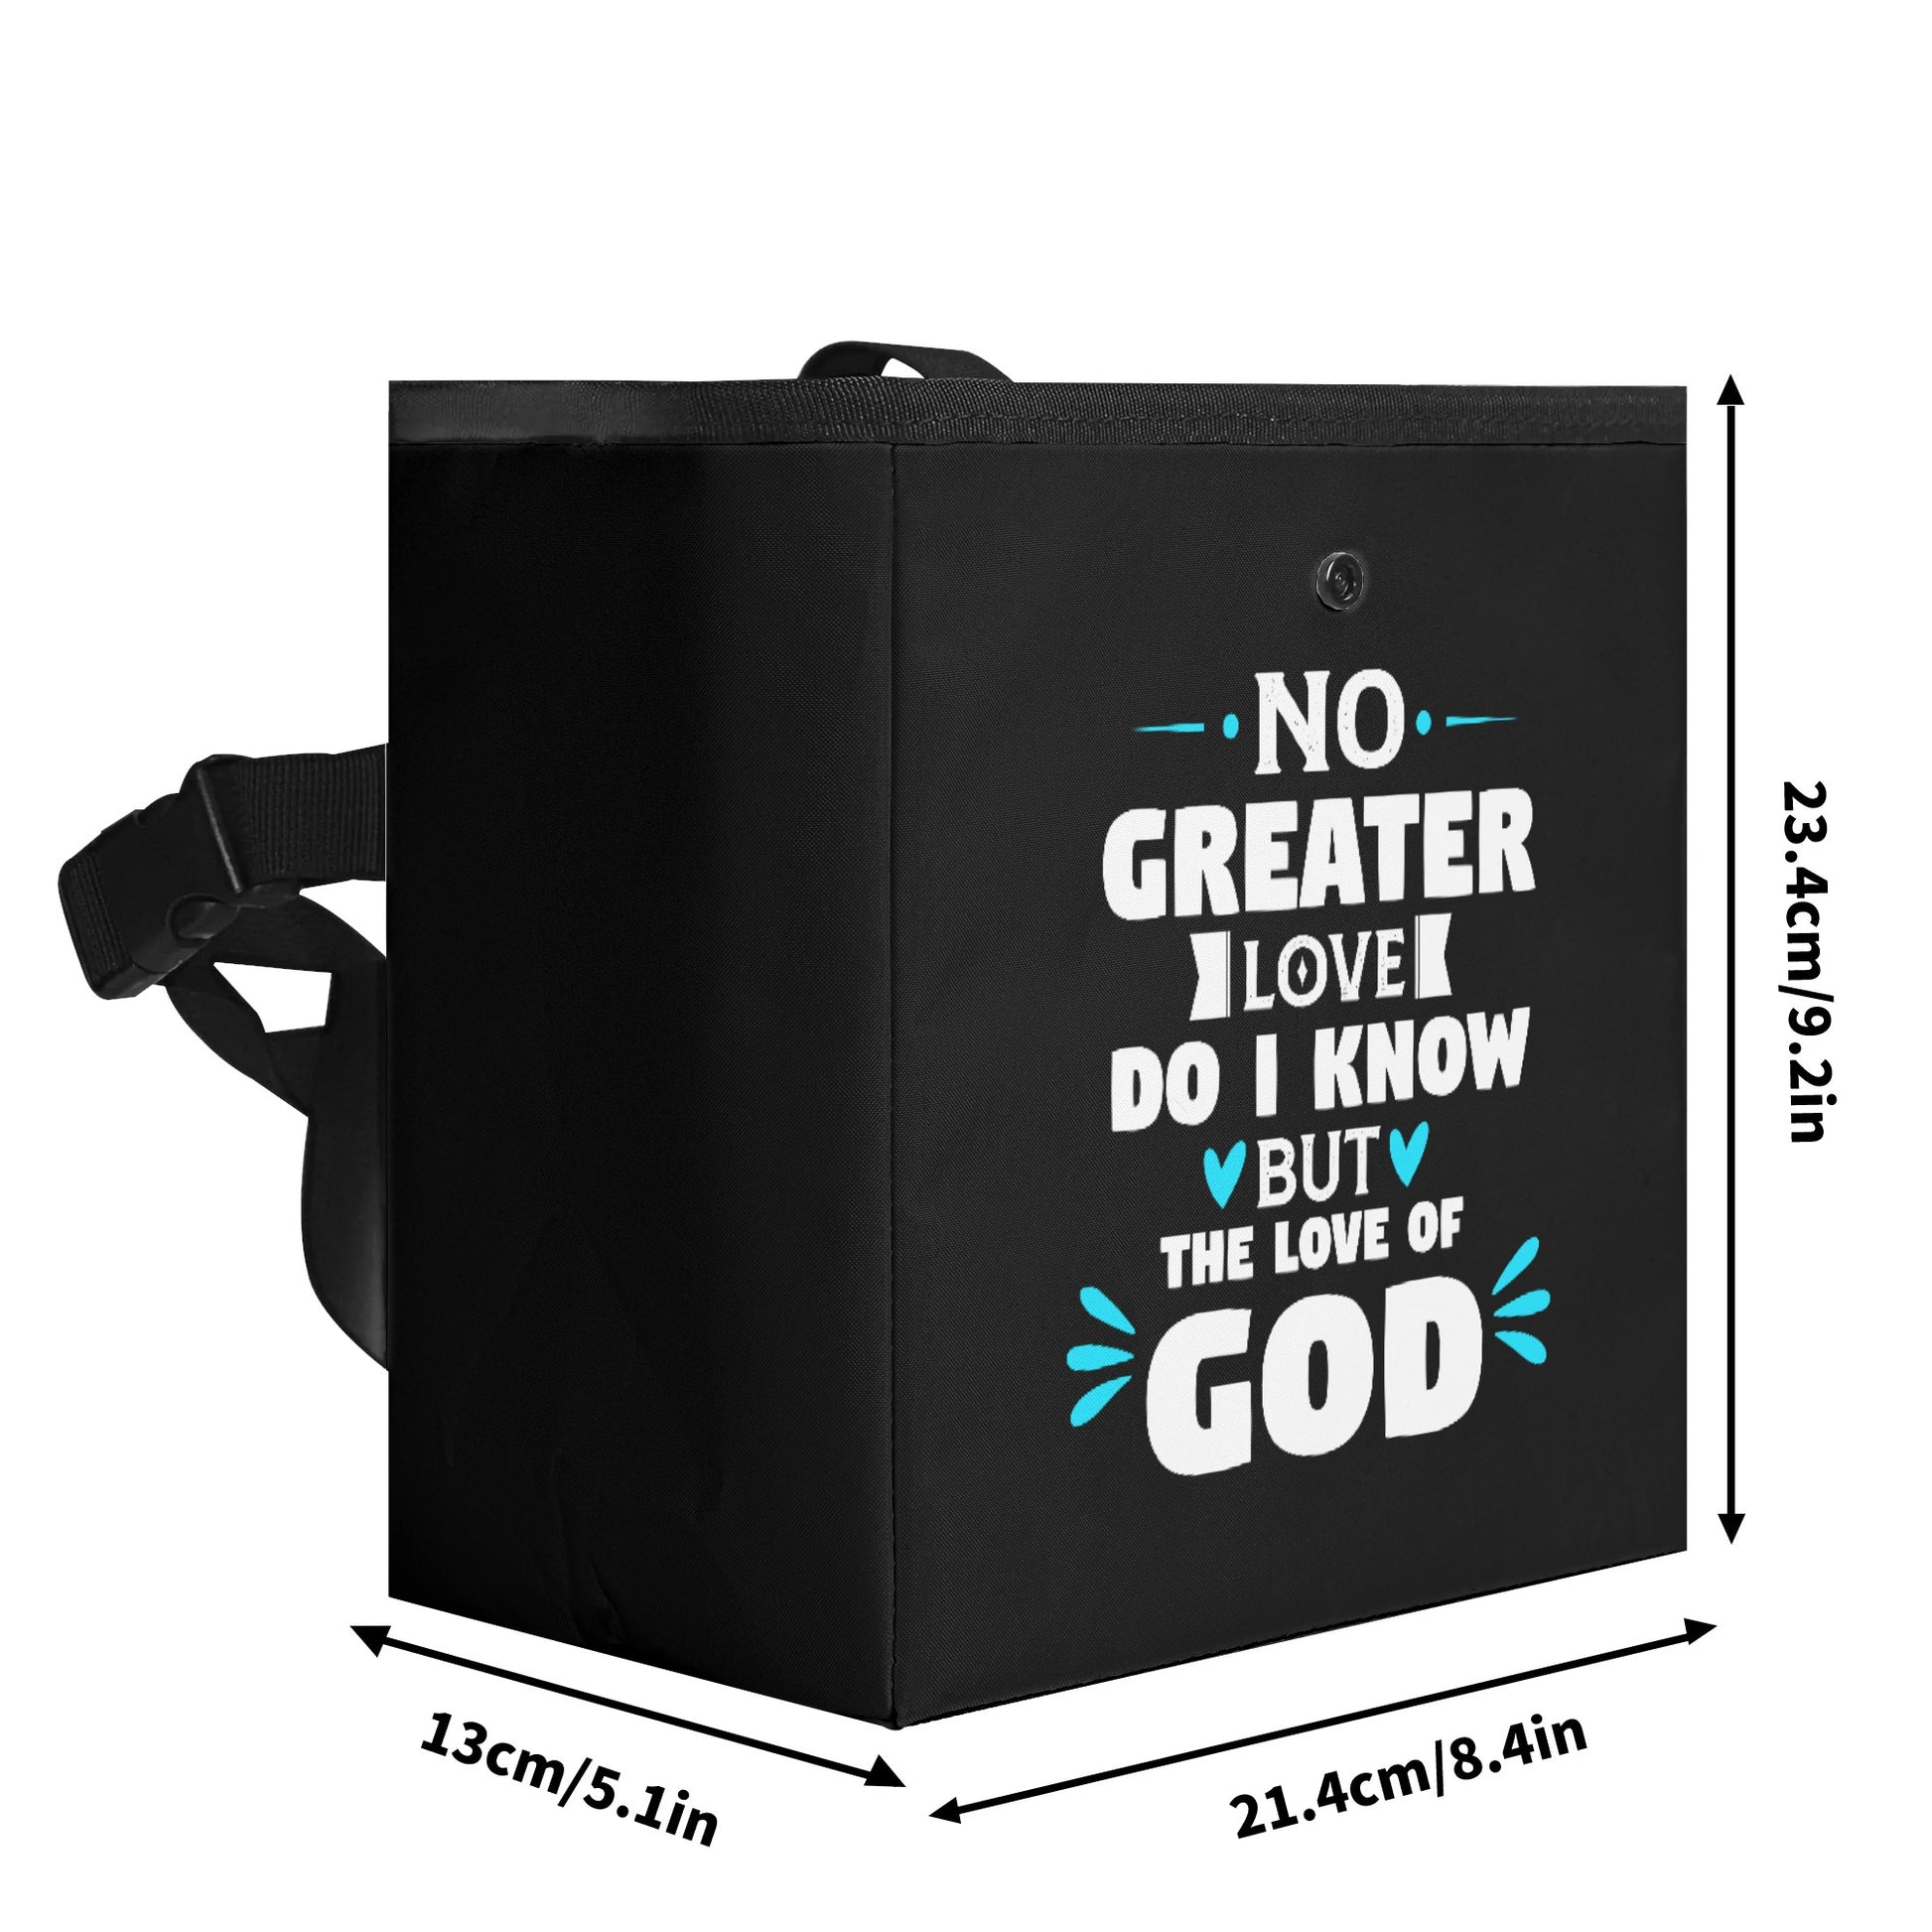 No Greater Love Do I Know But The Love Of God Hanging Storage Trash Car Organizer Bag Christian Car Accessories popcustoms